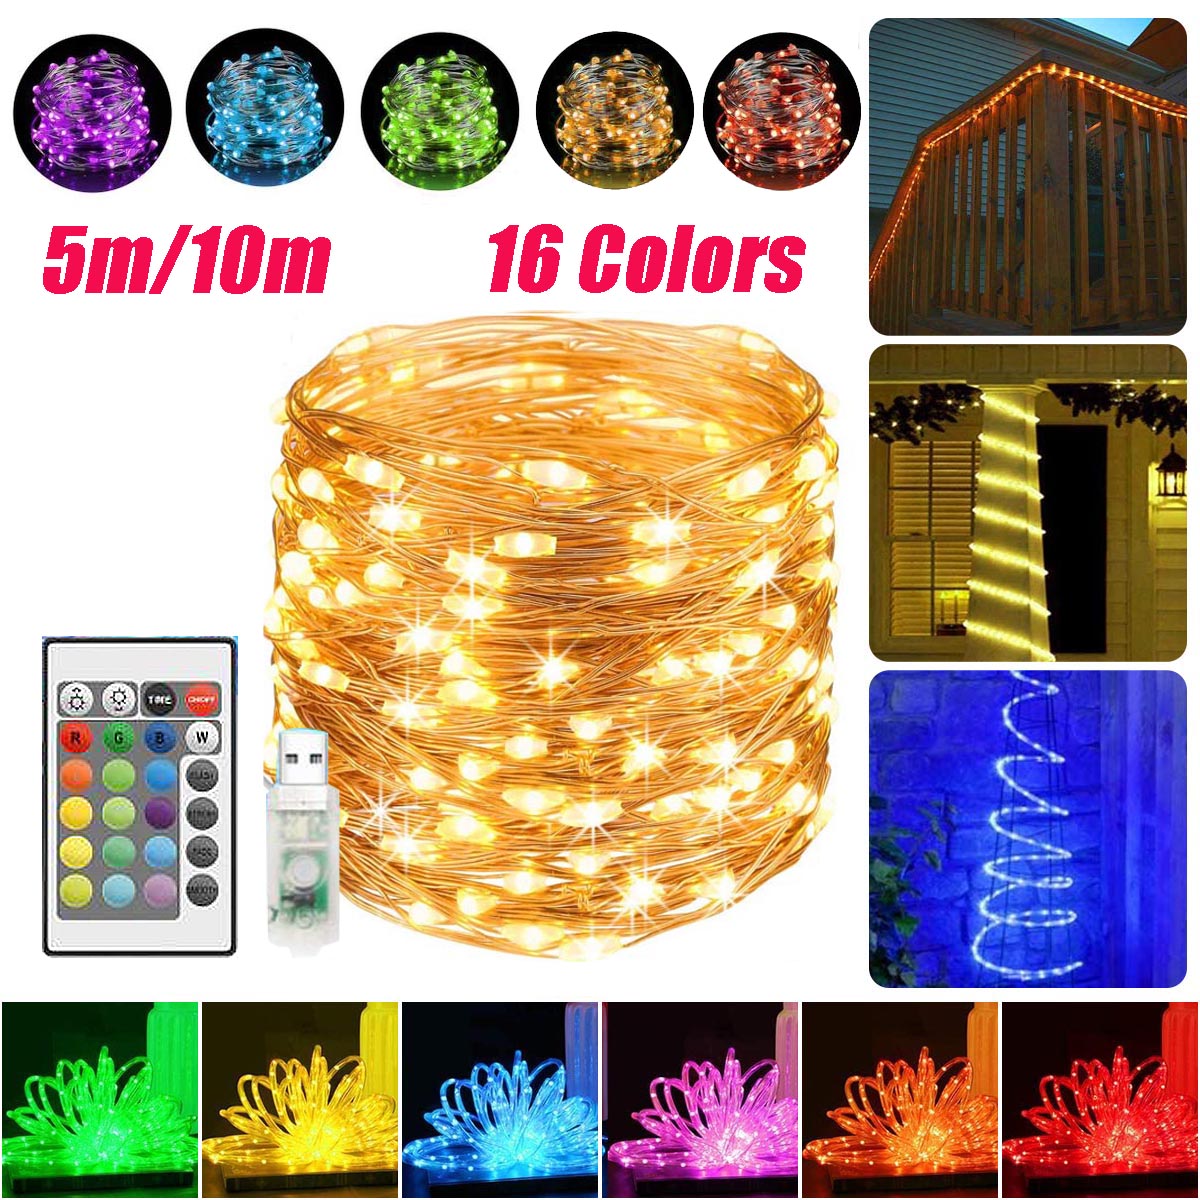 510M-LED-Lights-Christmas-Fairy-String-Lights-Christmas-Party-w-Remote-Control-1794627-1